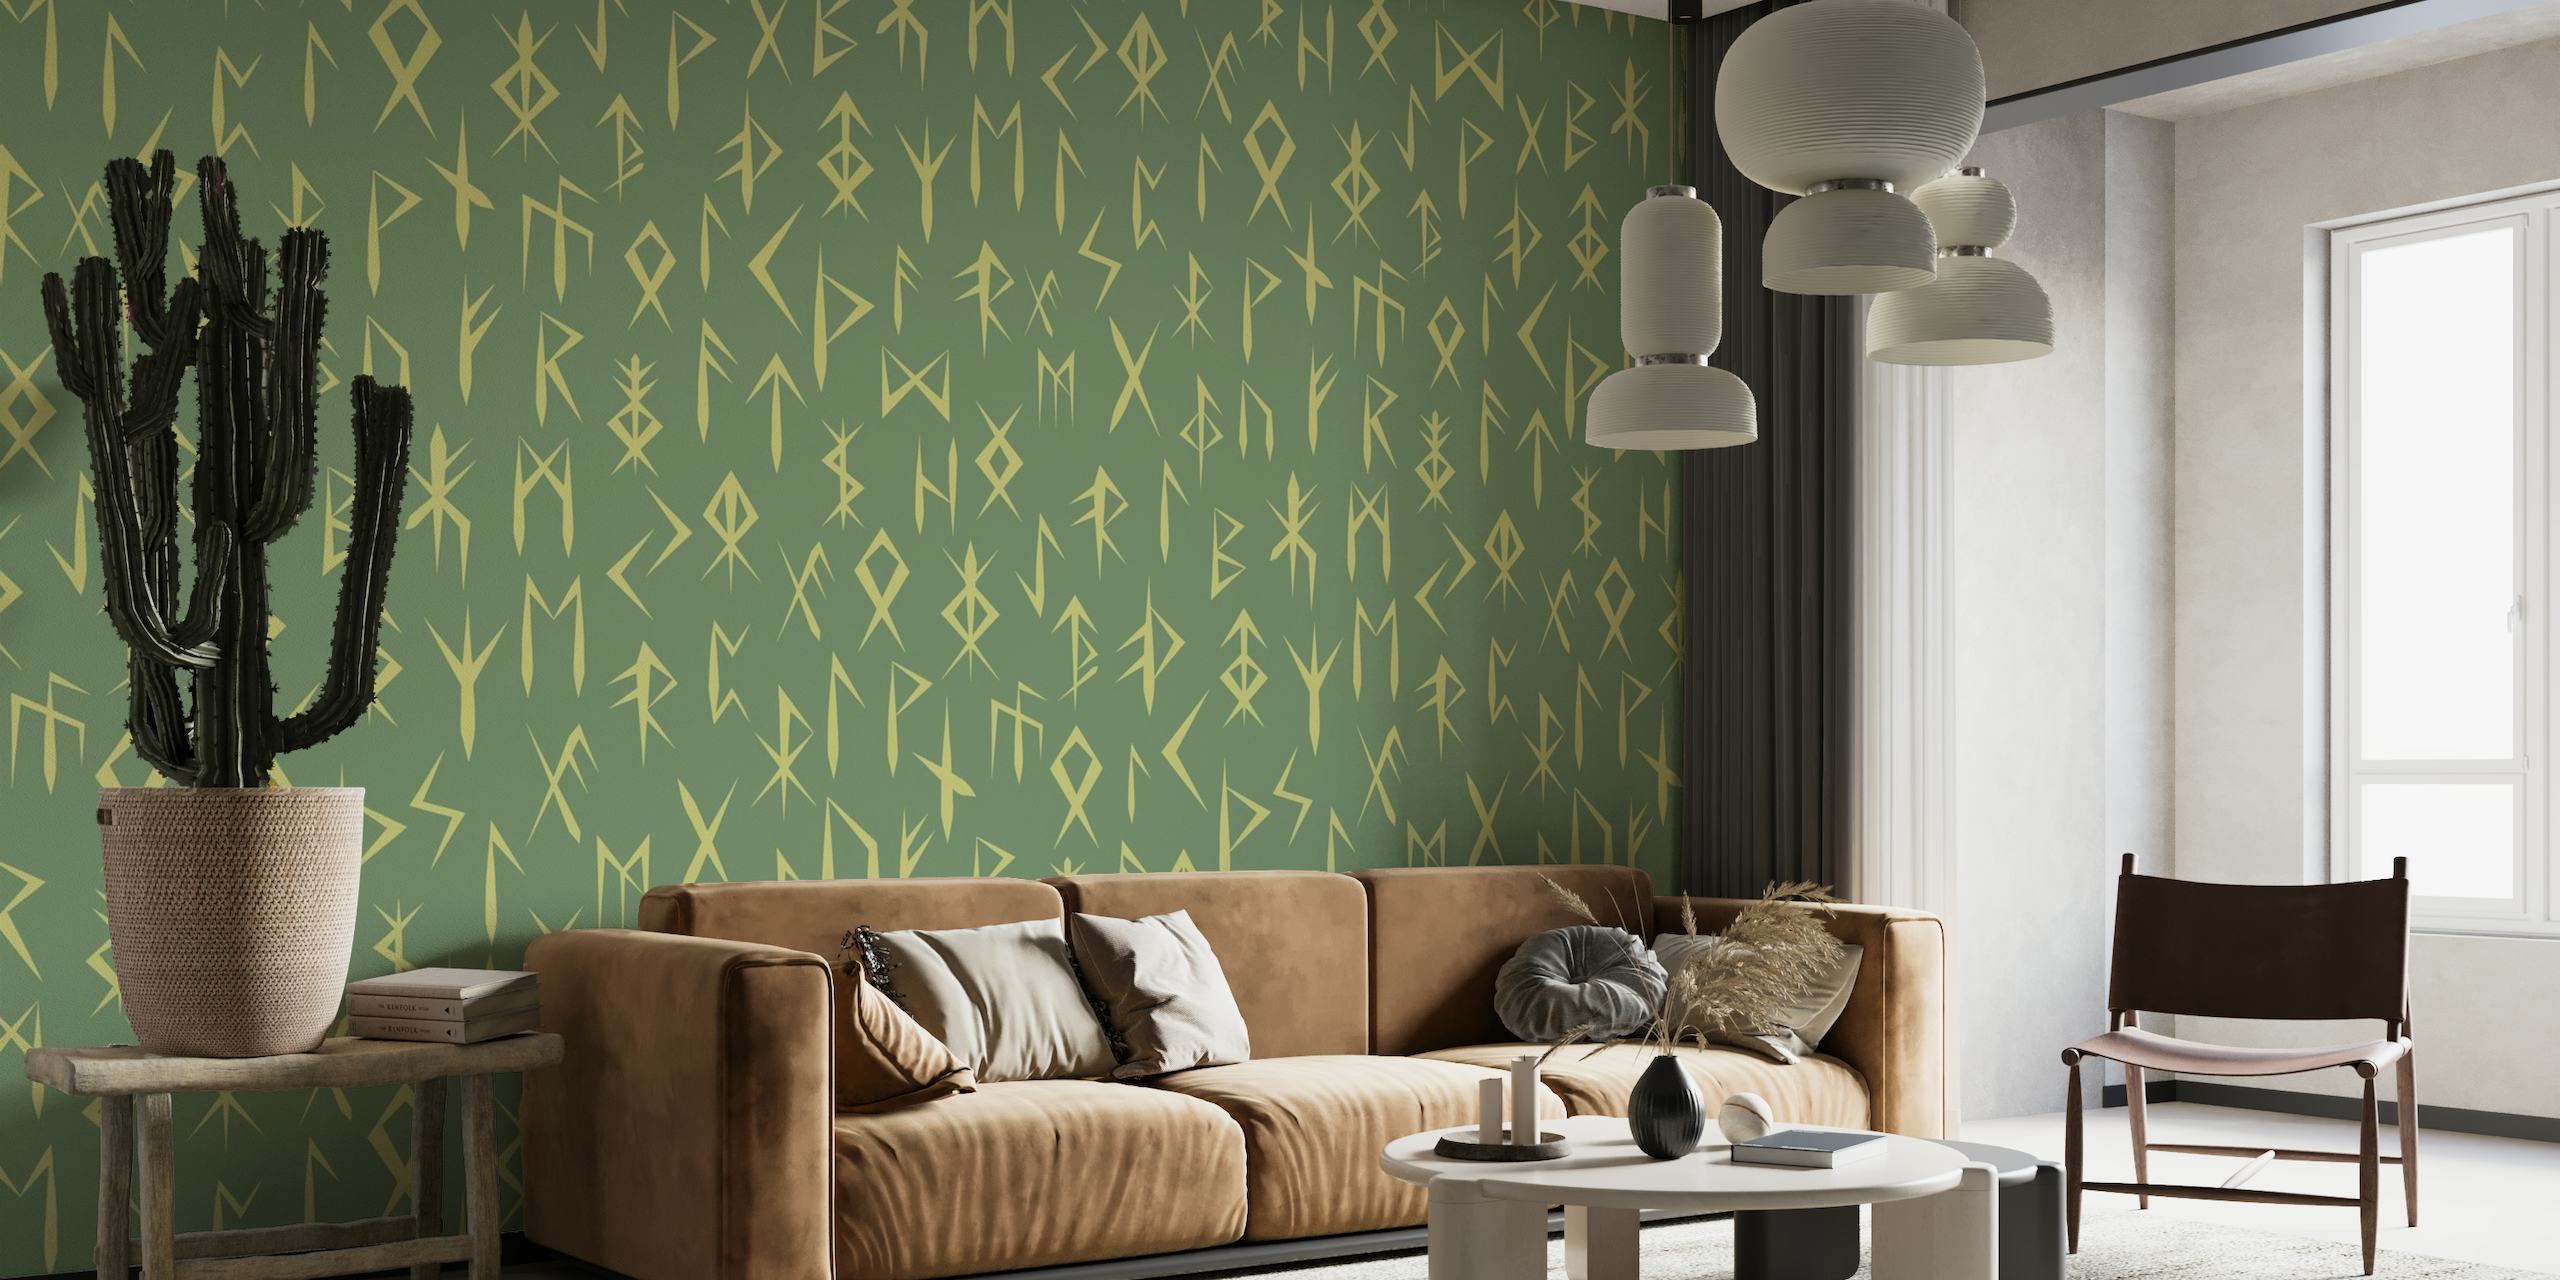 Nordic Runes wall mural with green background and yellow rune patterns